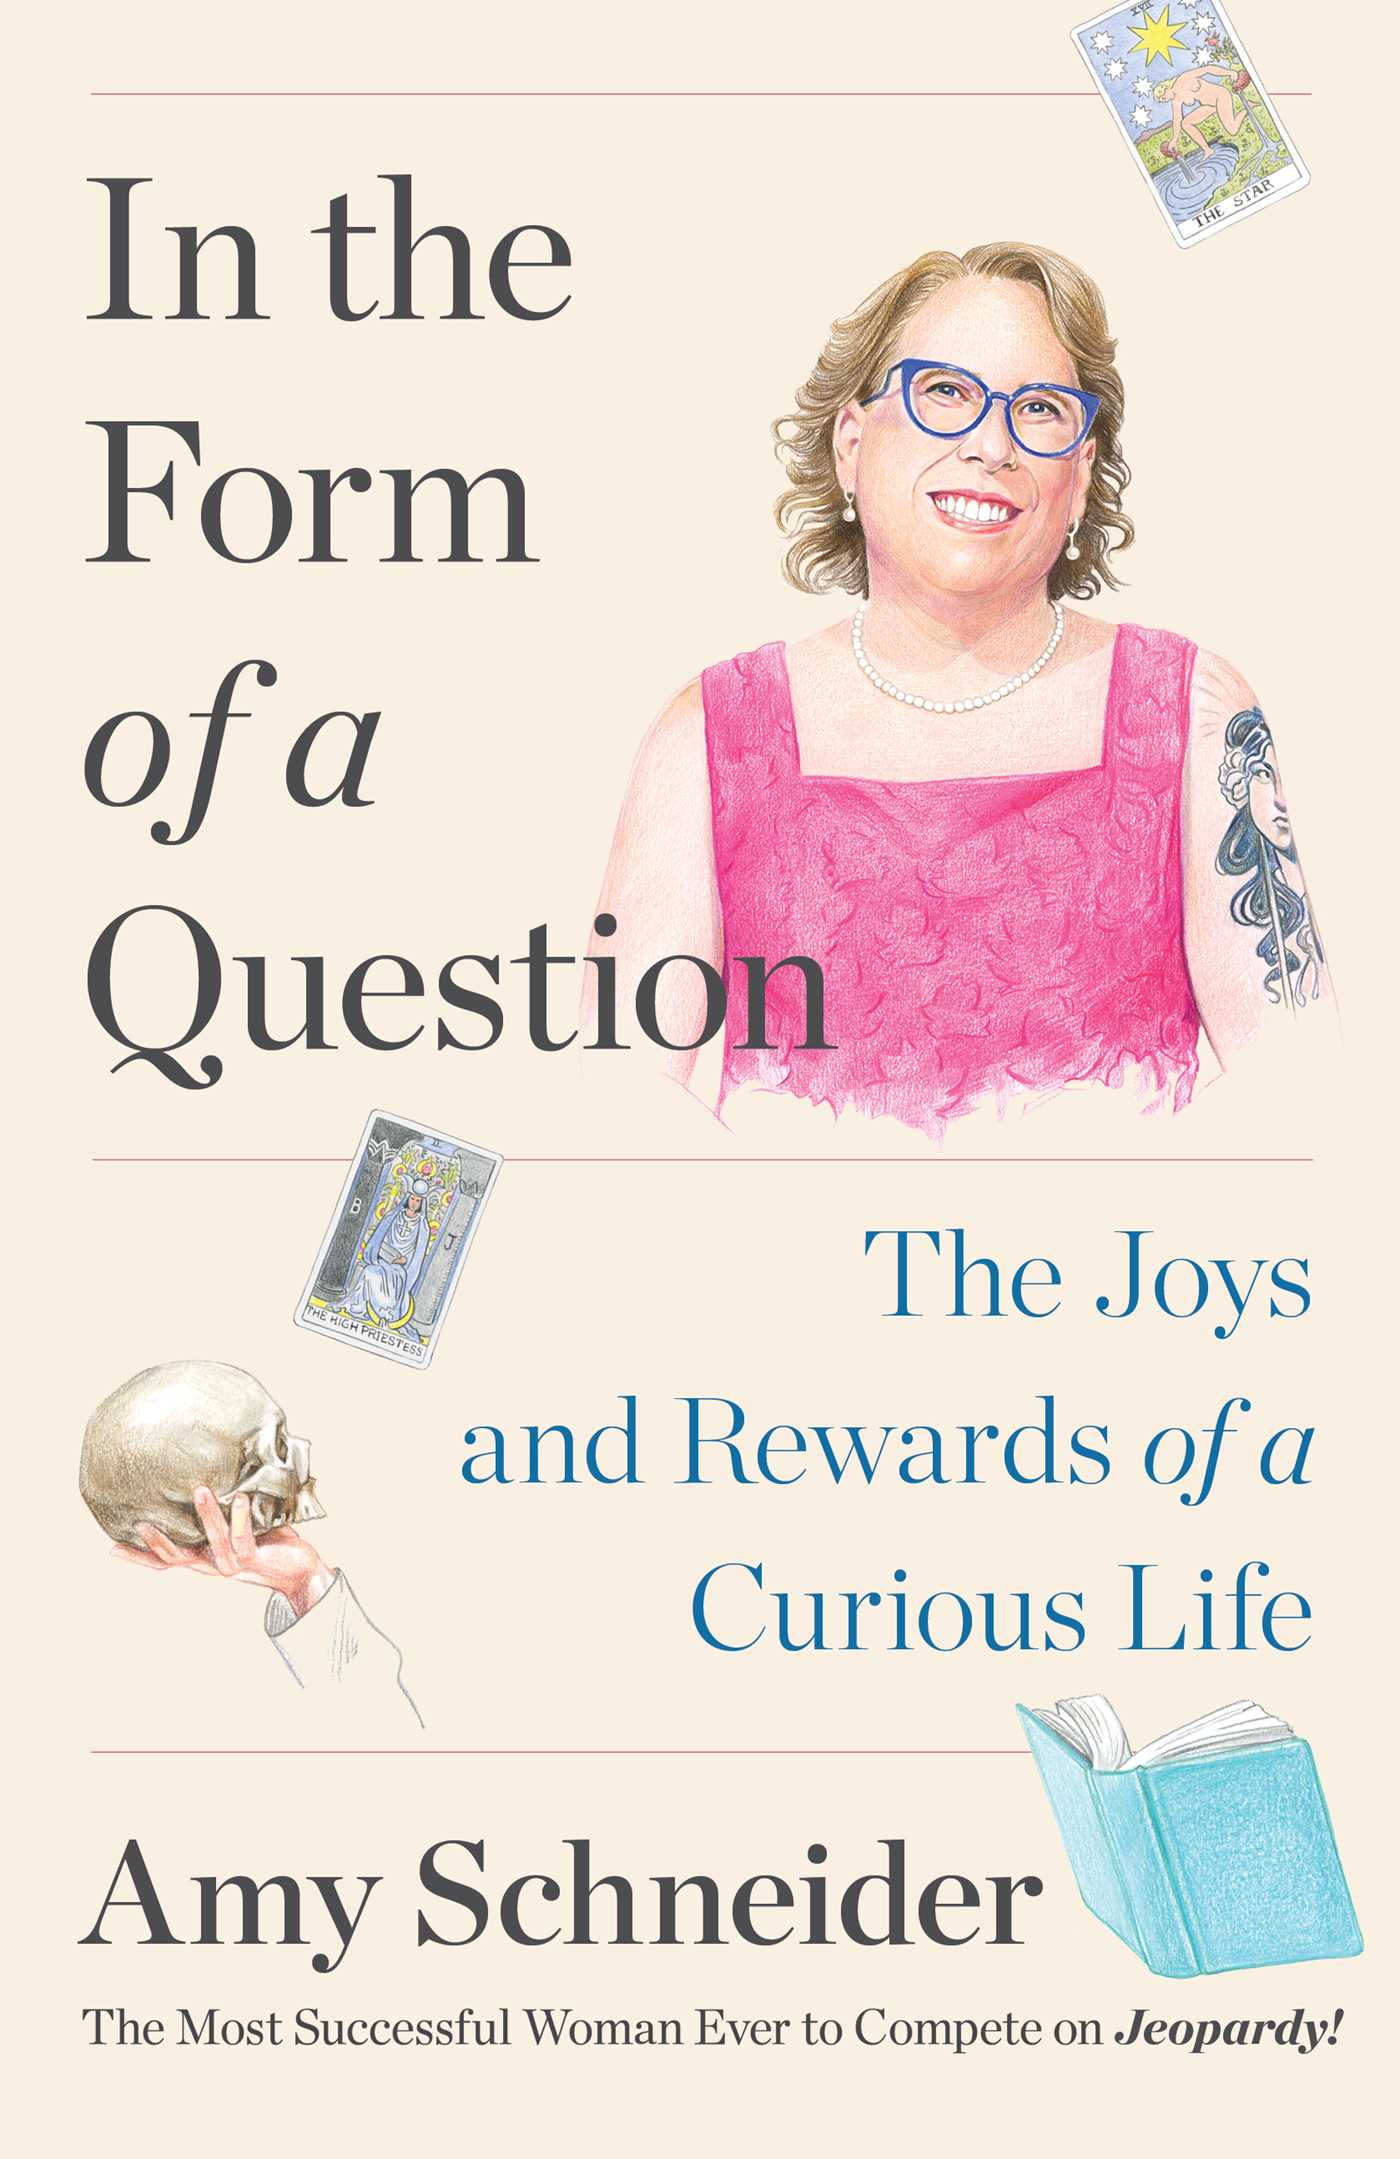 Image for "In the Form of a Question"